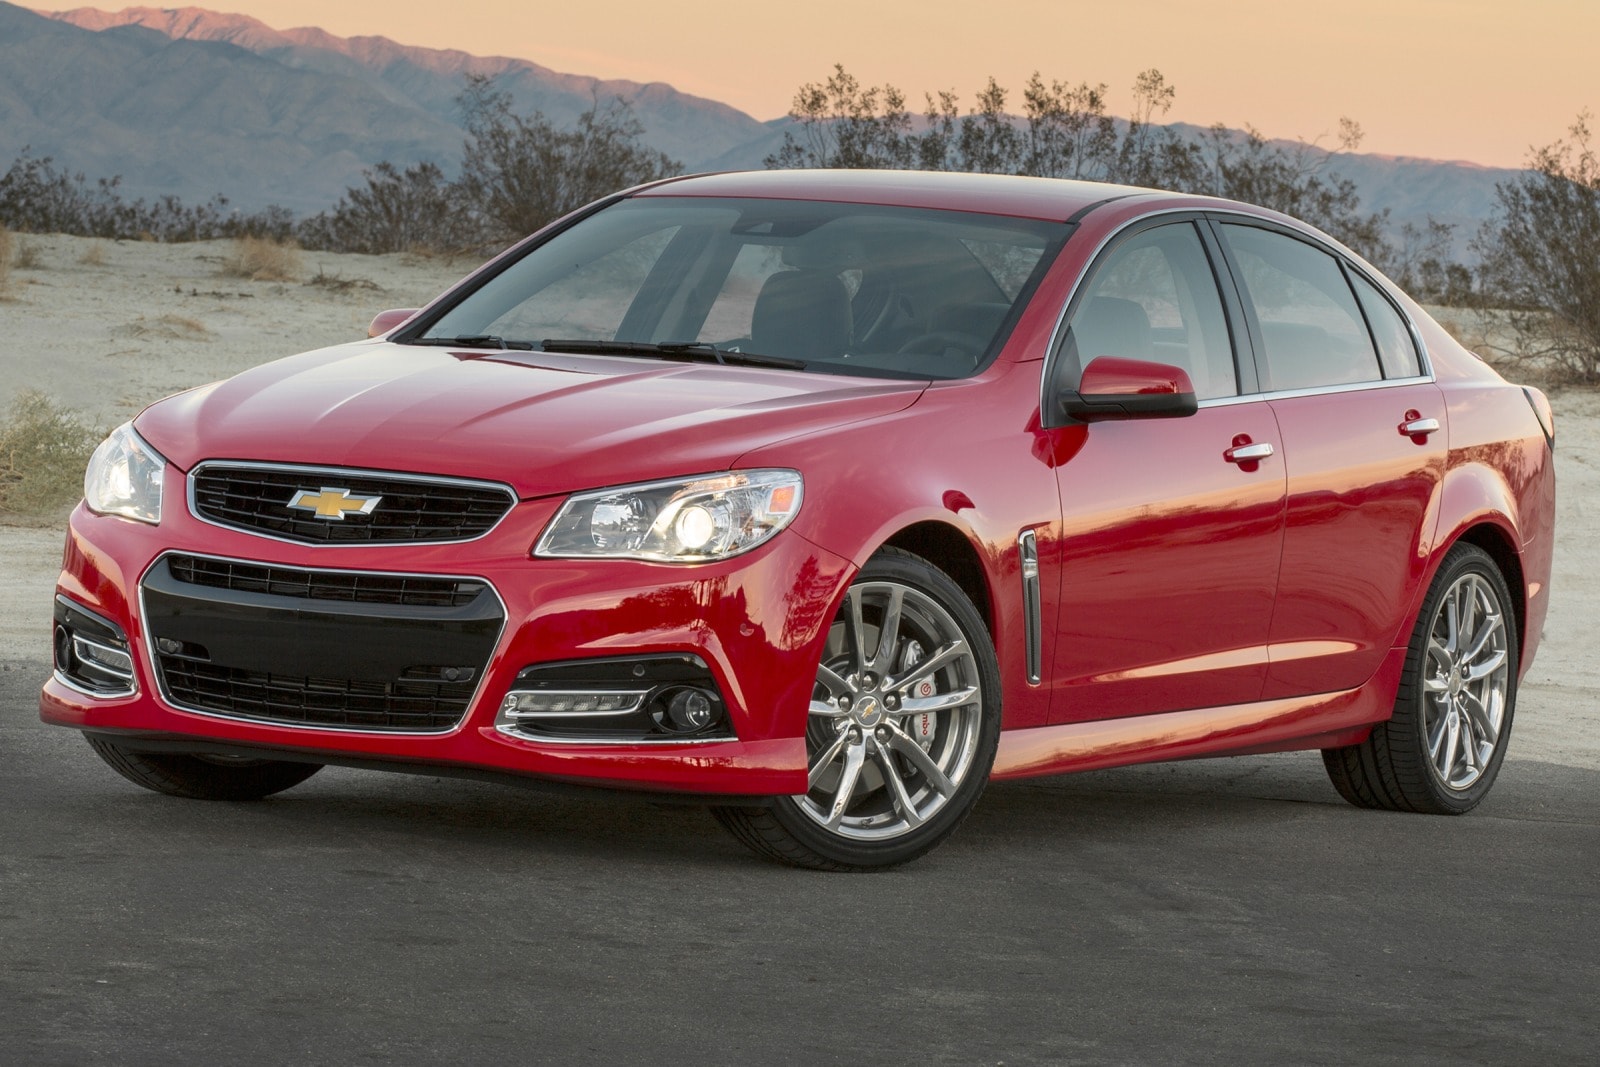 2014 Chevy SS Review & Ratings | Edmunds